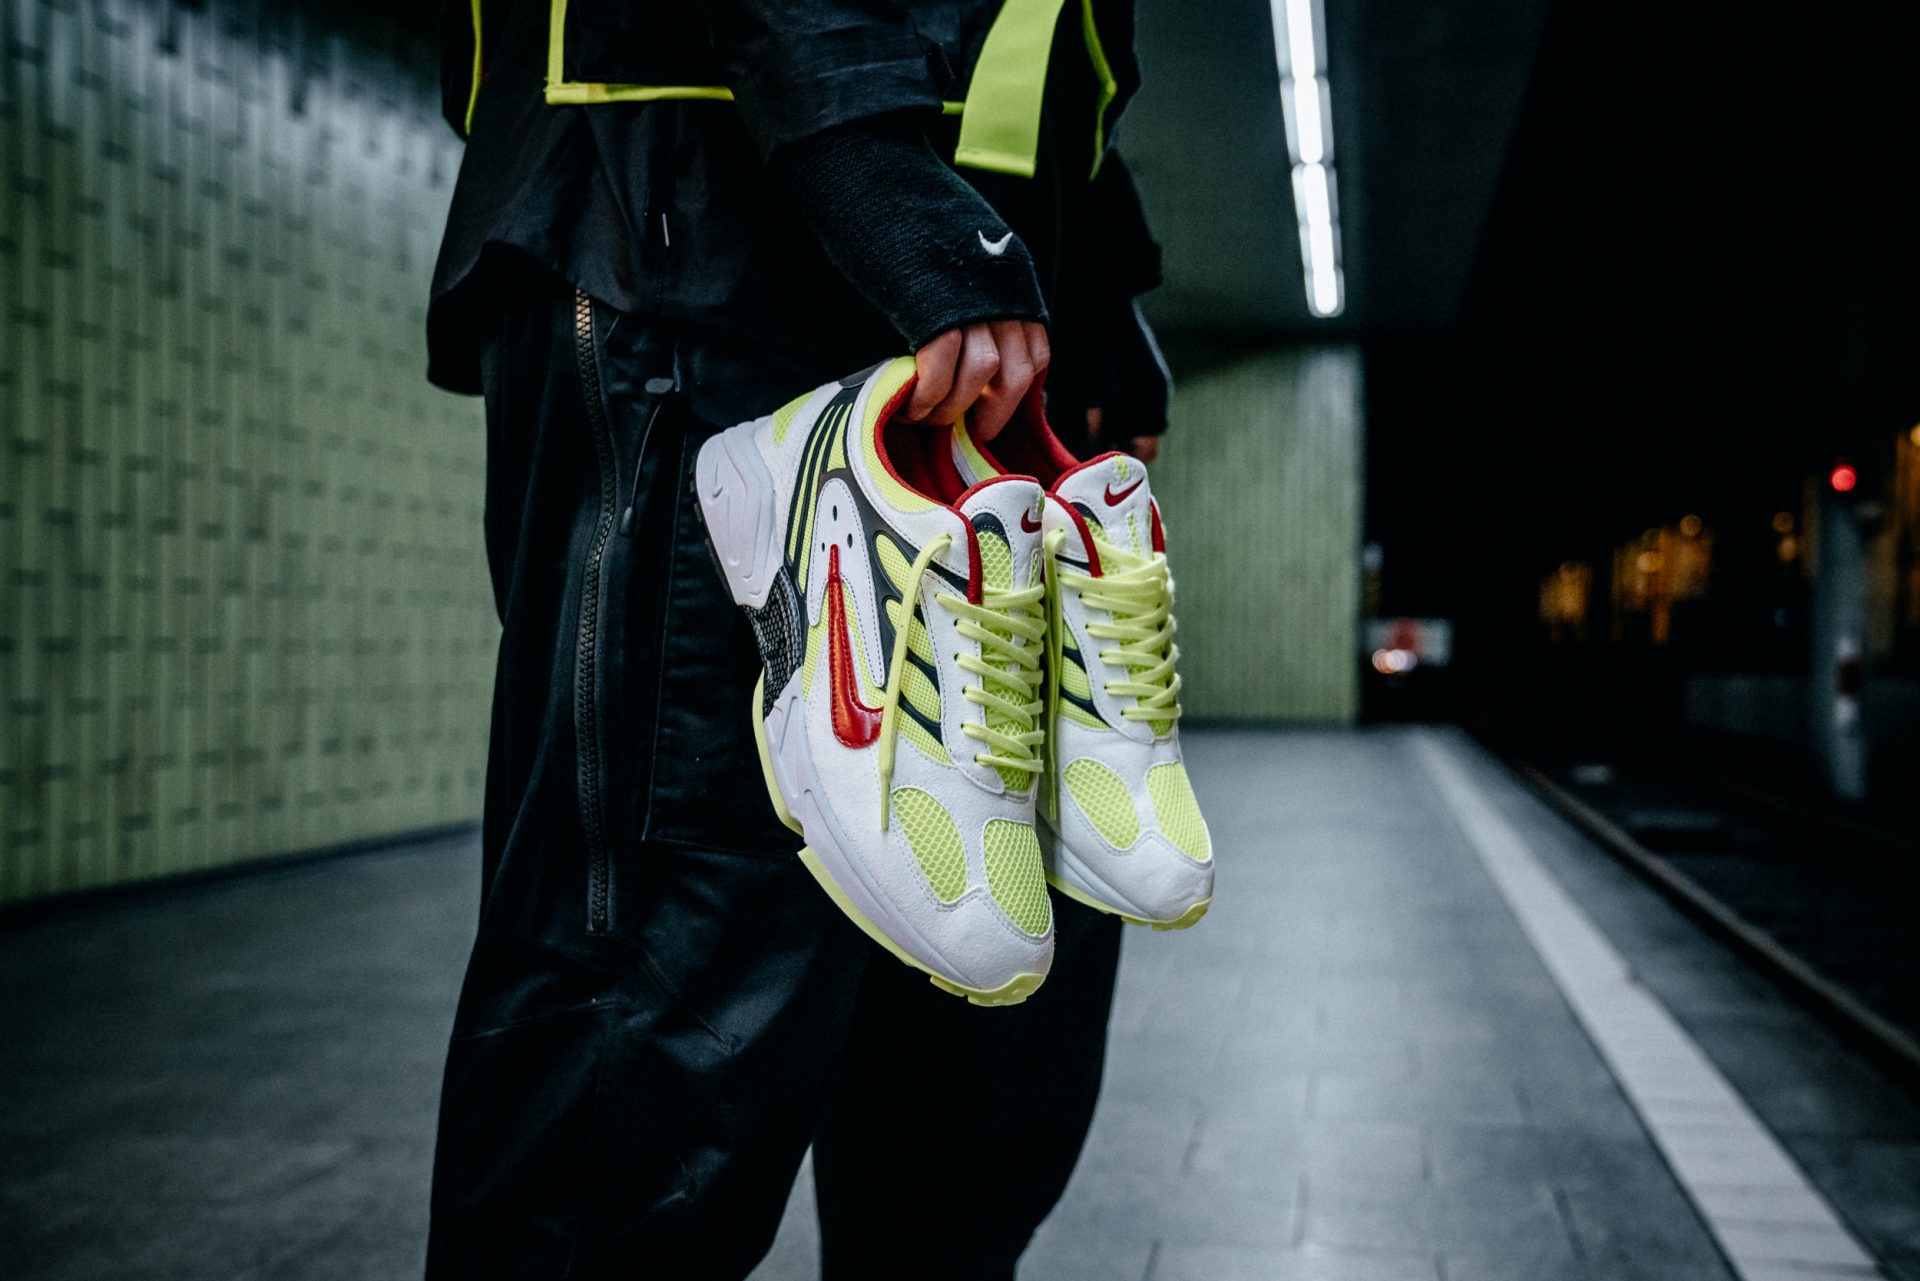 nike air ghost racer neon yellow